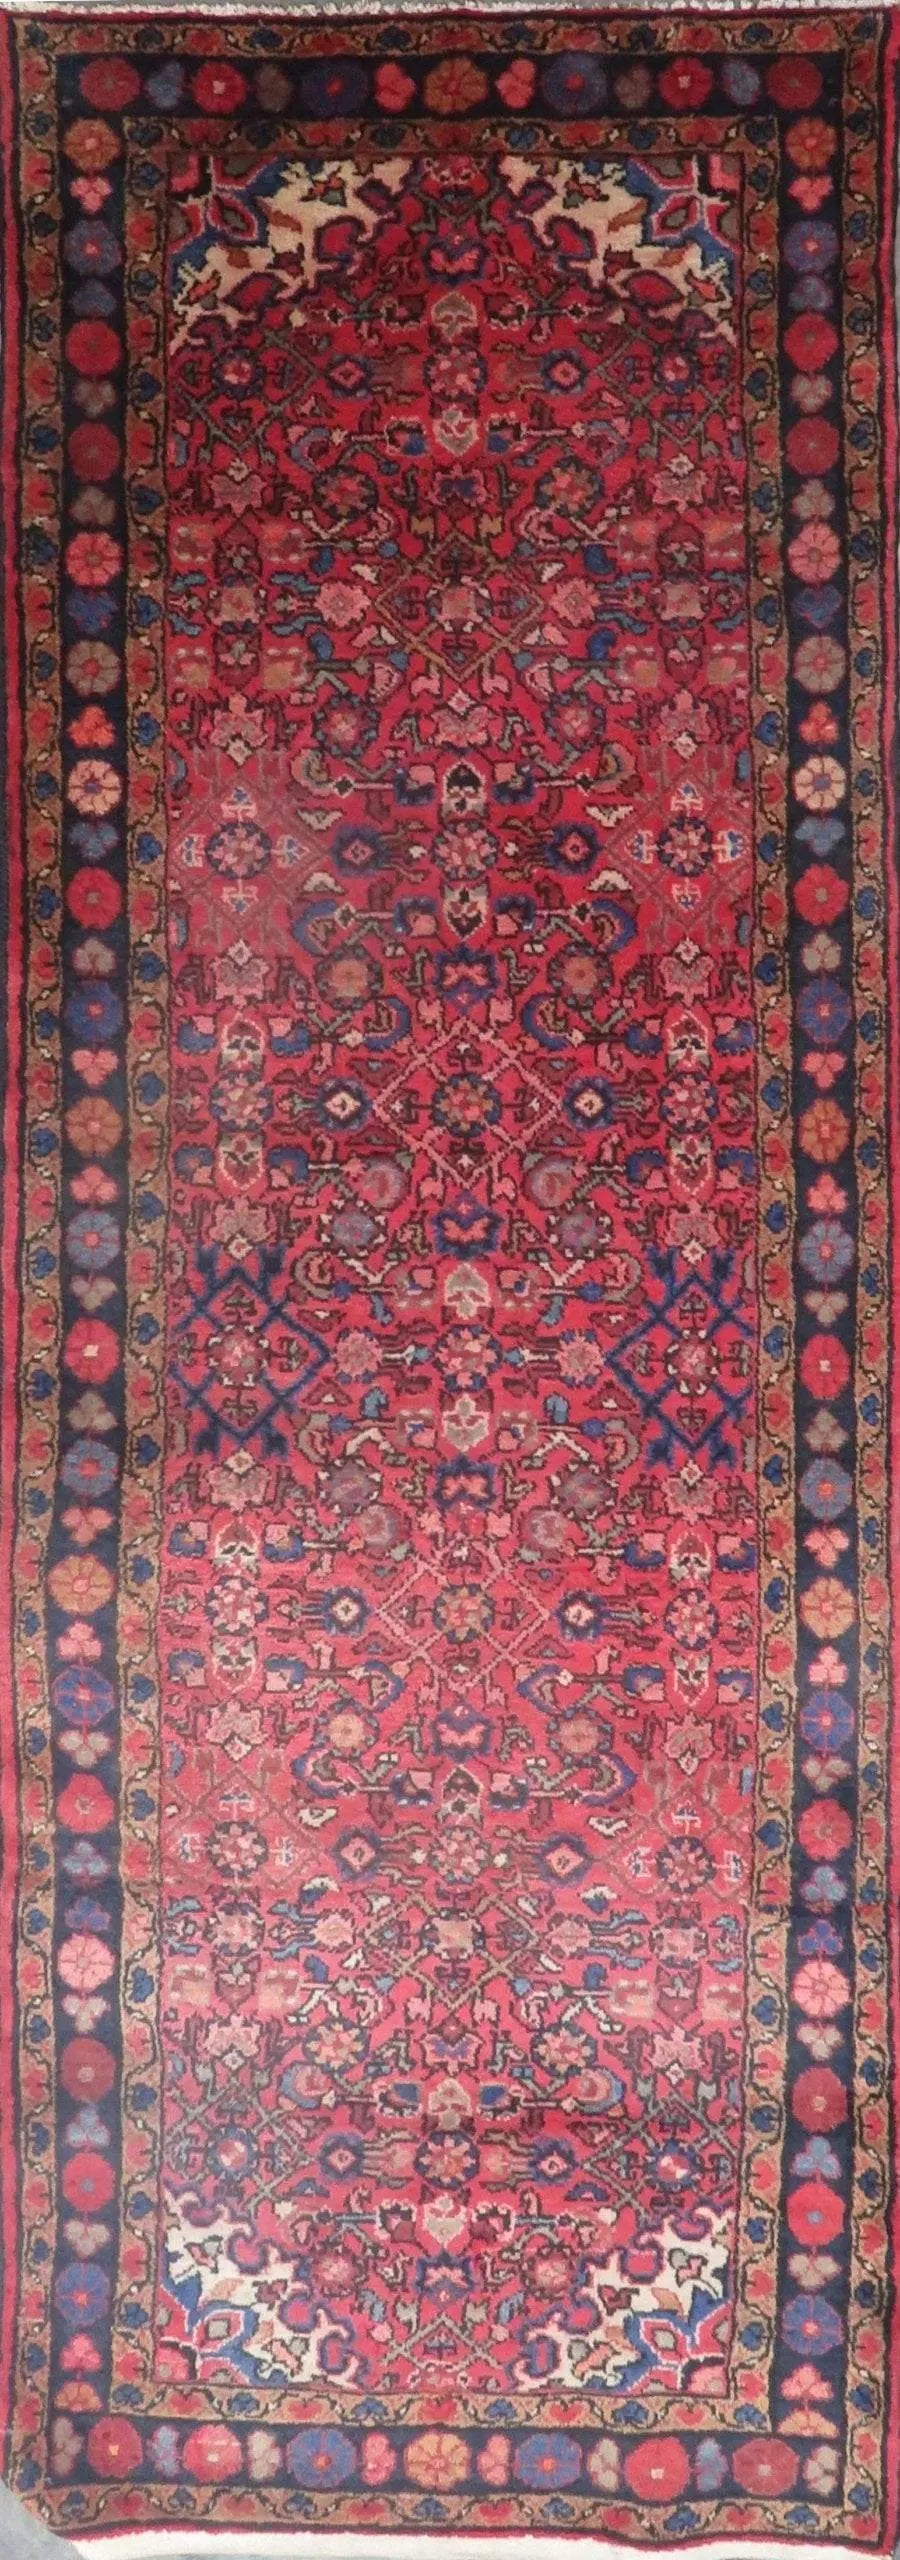 Hand-Knotted Persian Wool Rug _ Luxurious Vintage Design, 10'0" x 3'3", Artisan Crafted